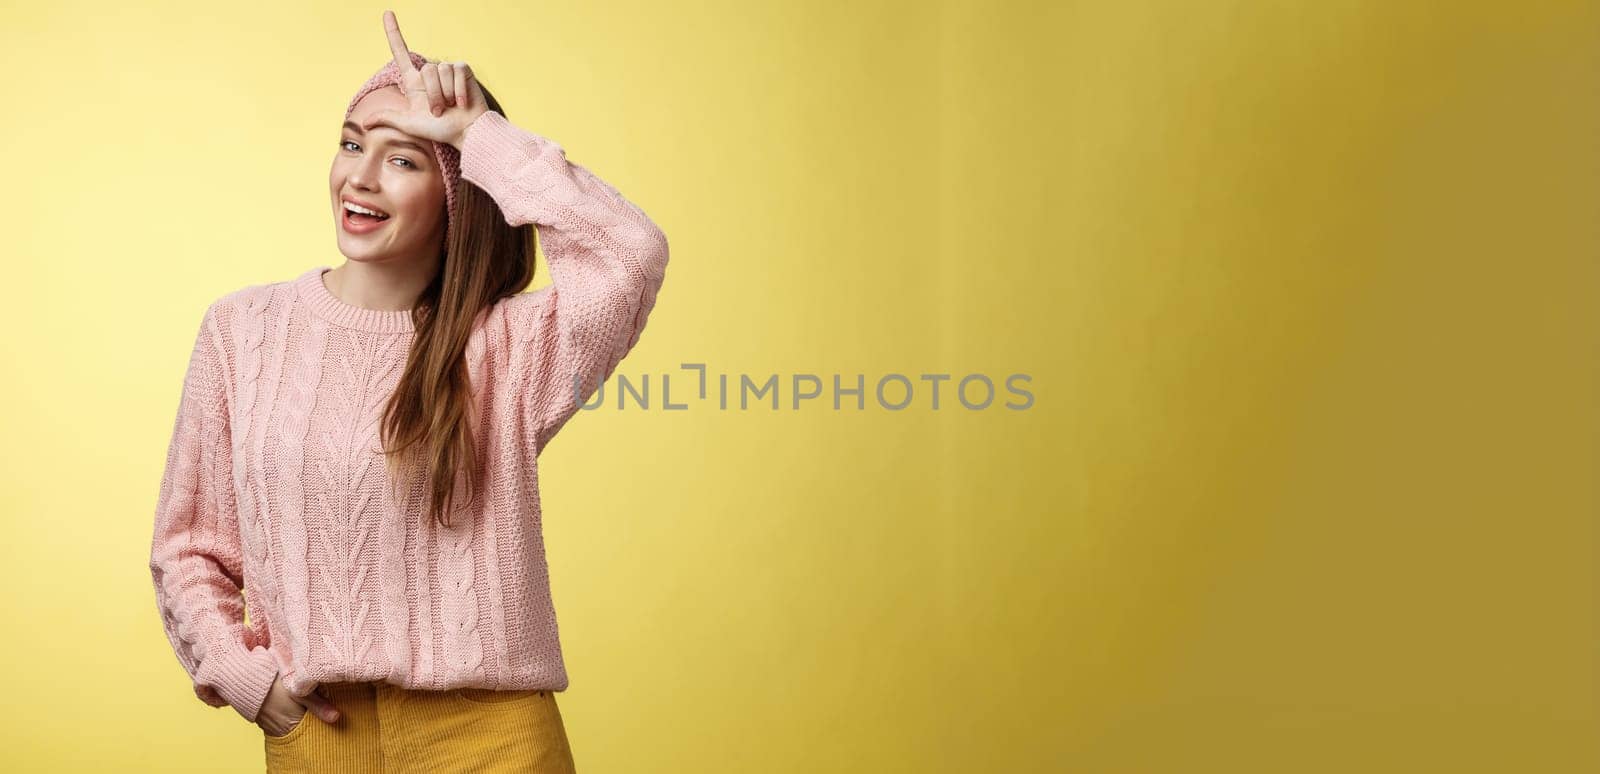 Attractive triumphing arrogant and confident cute glamourous woman in knitted sweater, headband showing l letter on forehead, loser sign and laughing over lost team, mocking having fun by Benzoix